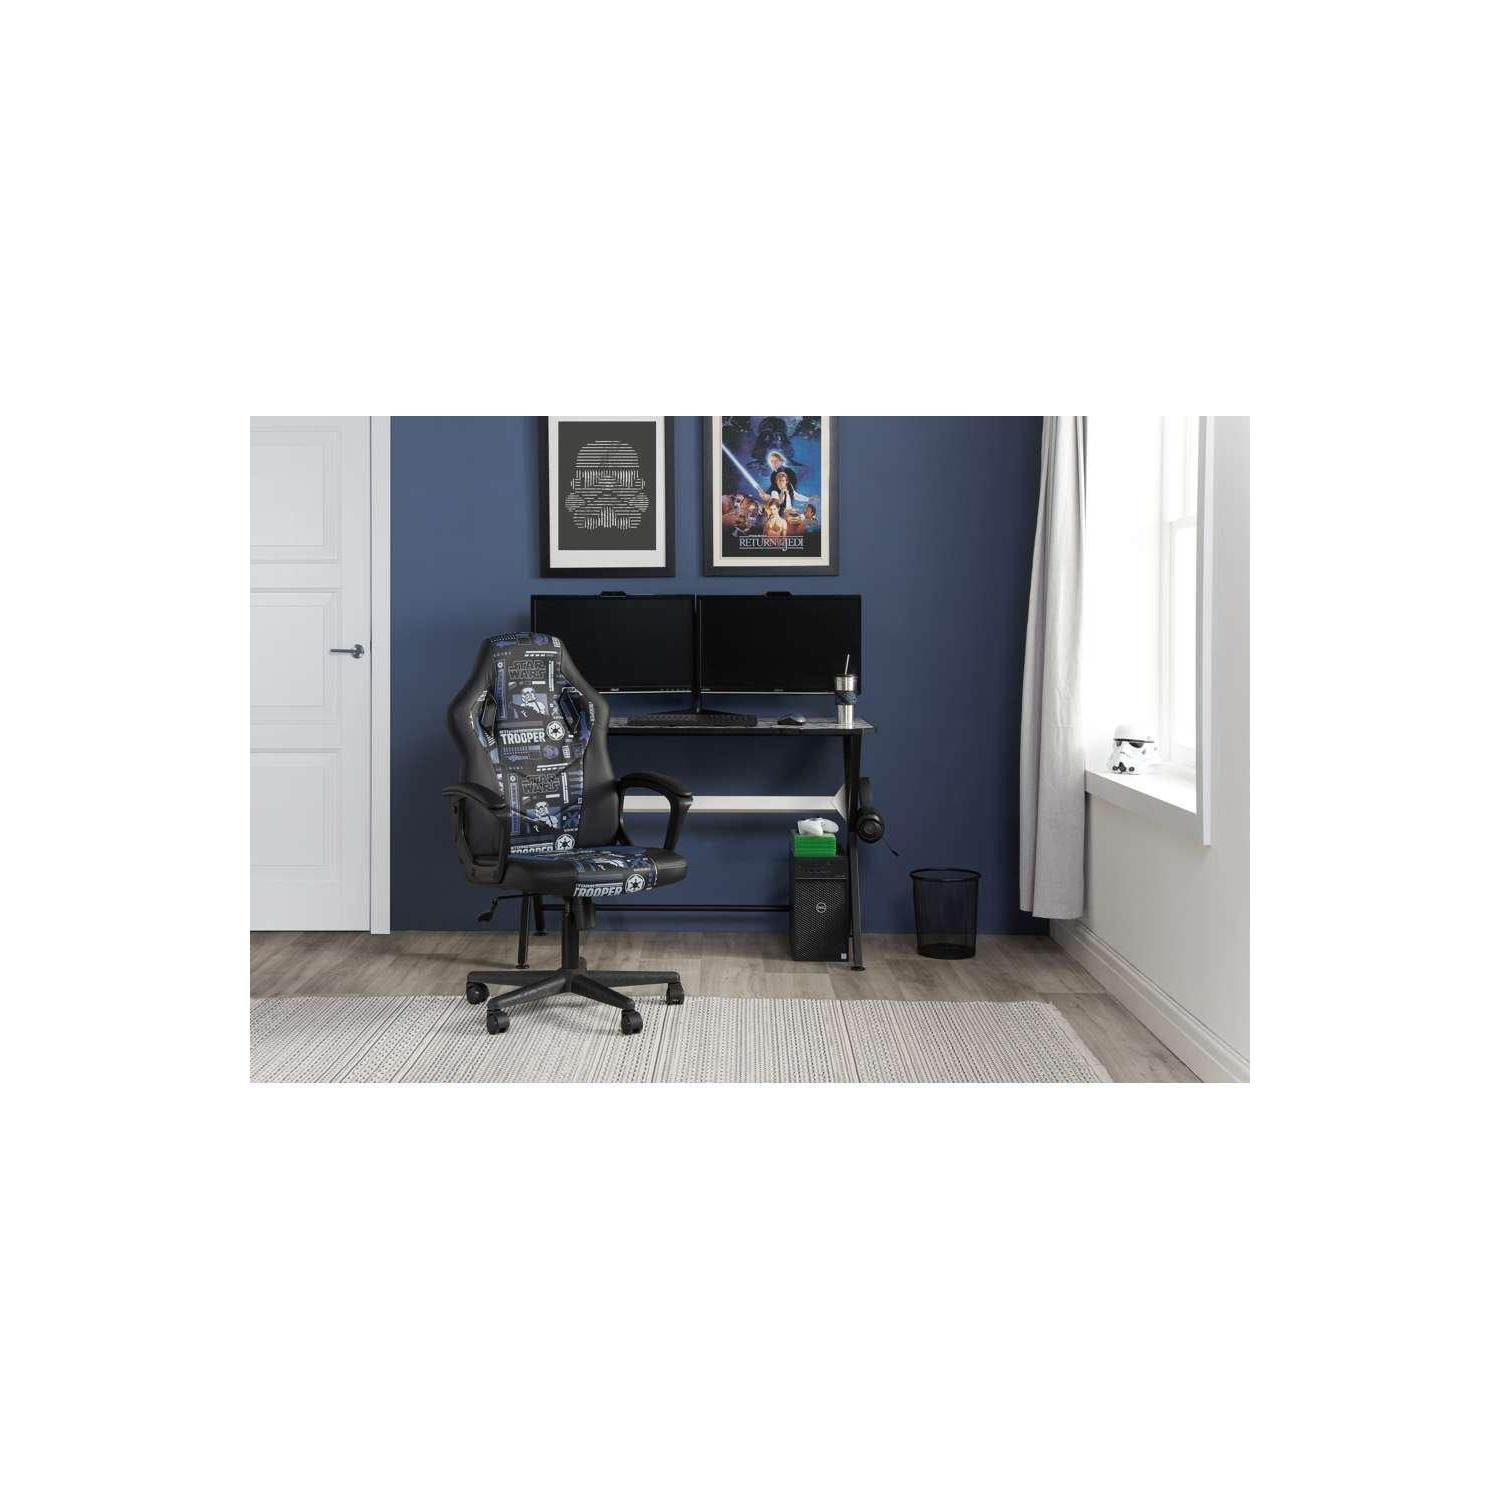 Official Disney Star Wars Blue Computer Gaming Office Swivel Chair - image 1